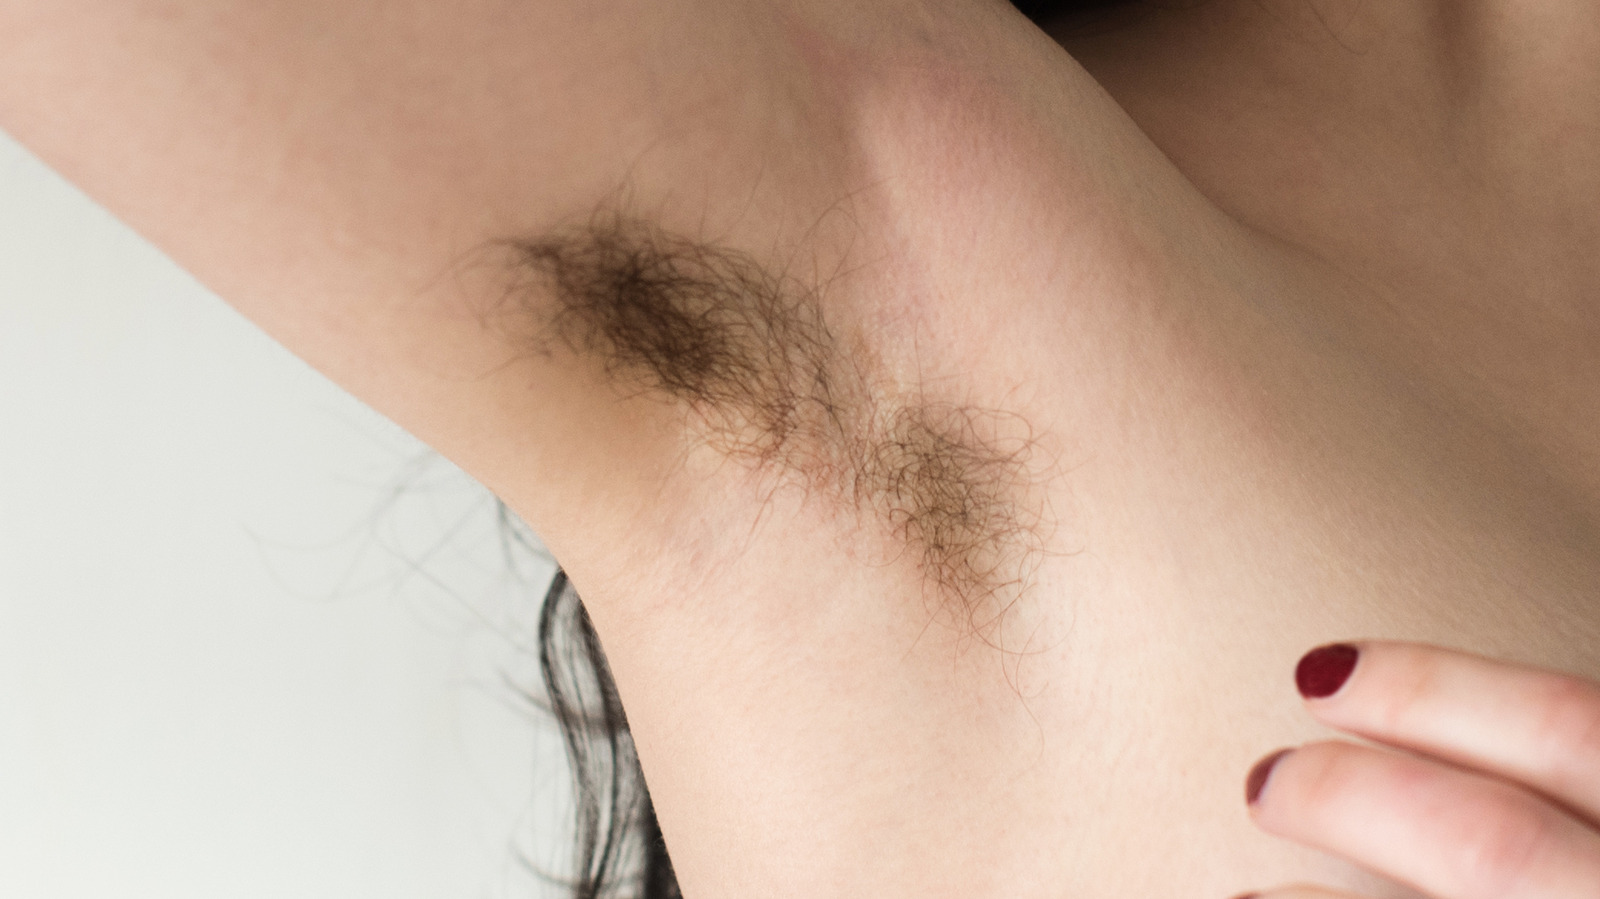 Why Do We Have Armpit Hair?